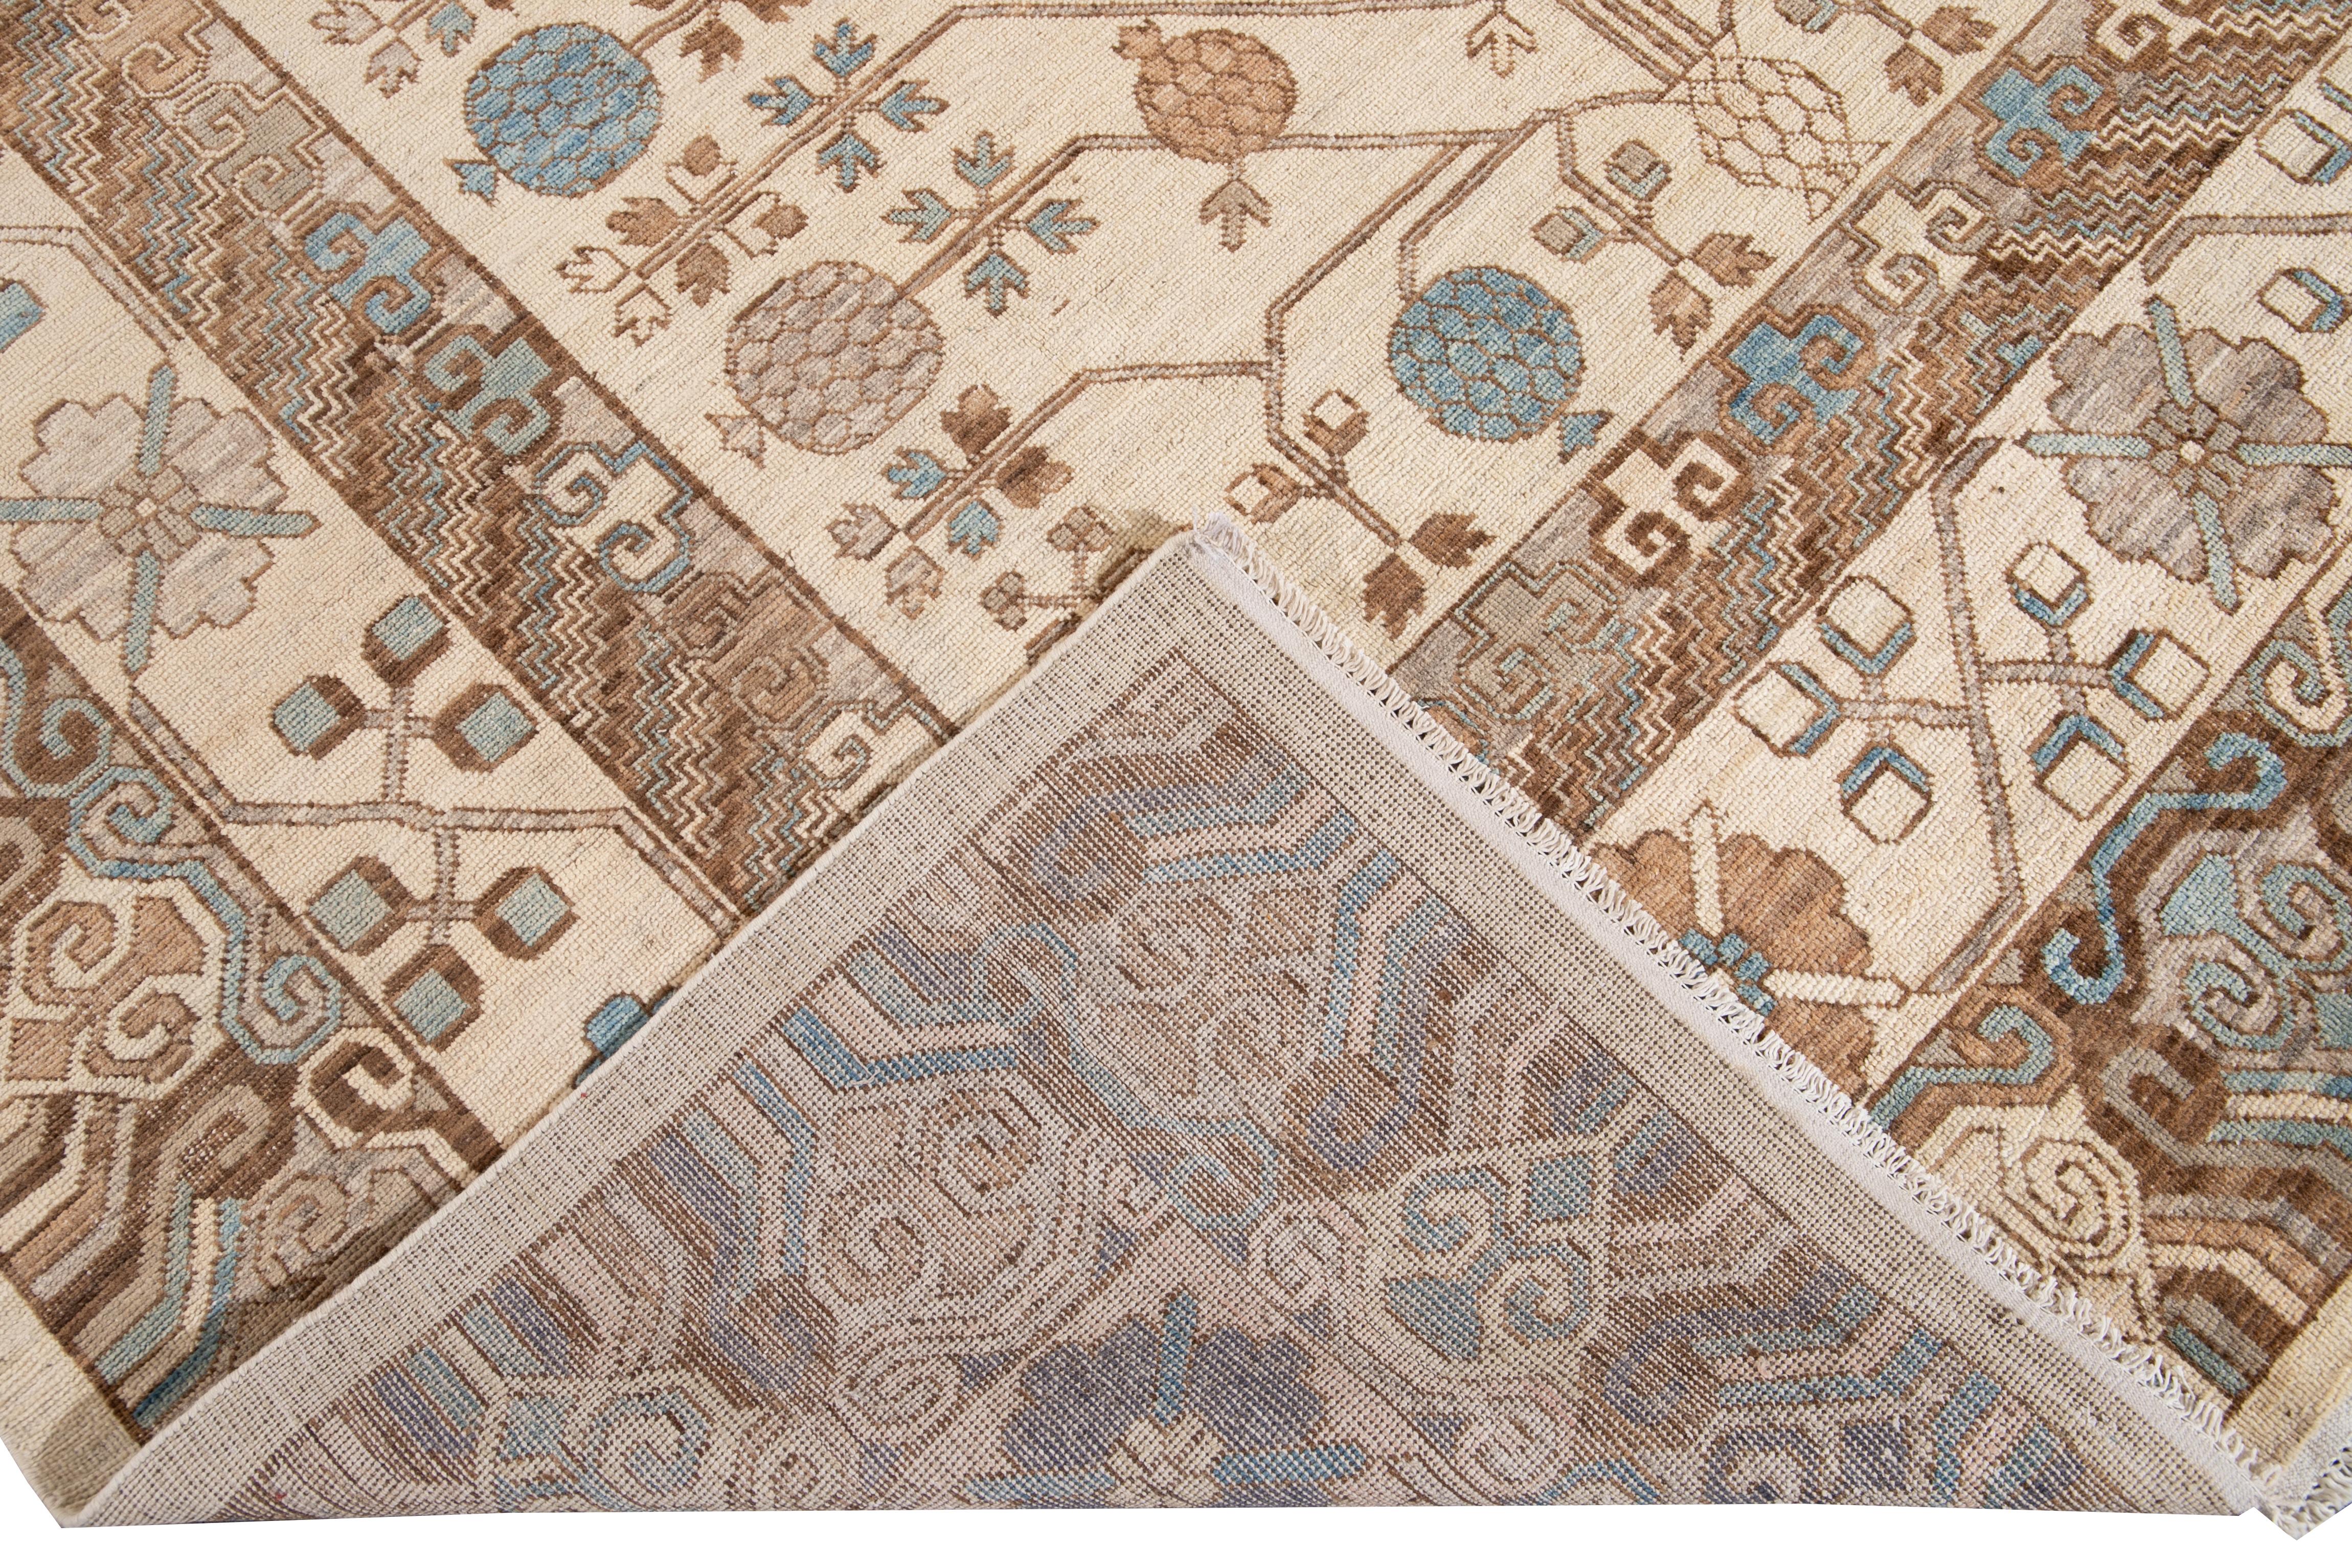 Beautiful modern Khotan style hand knotted wool rug beige field. This Khotan-style rug has a beautifully designed frame and accent of blue, beige, and brown in a gorgeous all-over geometric floral design.

This rug measures 8' 1